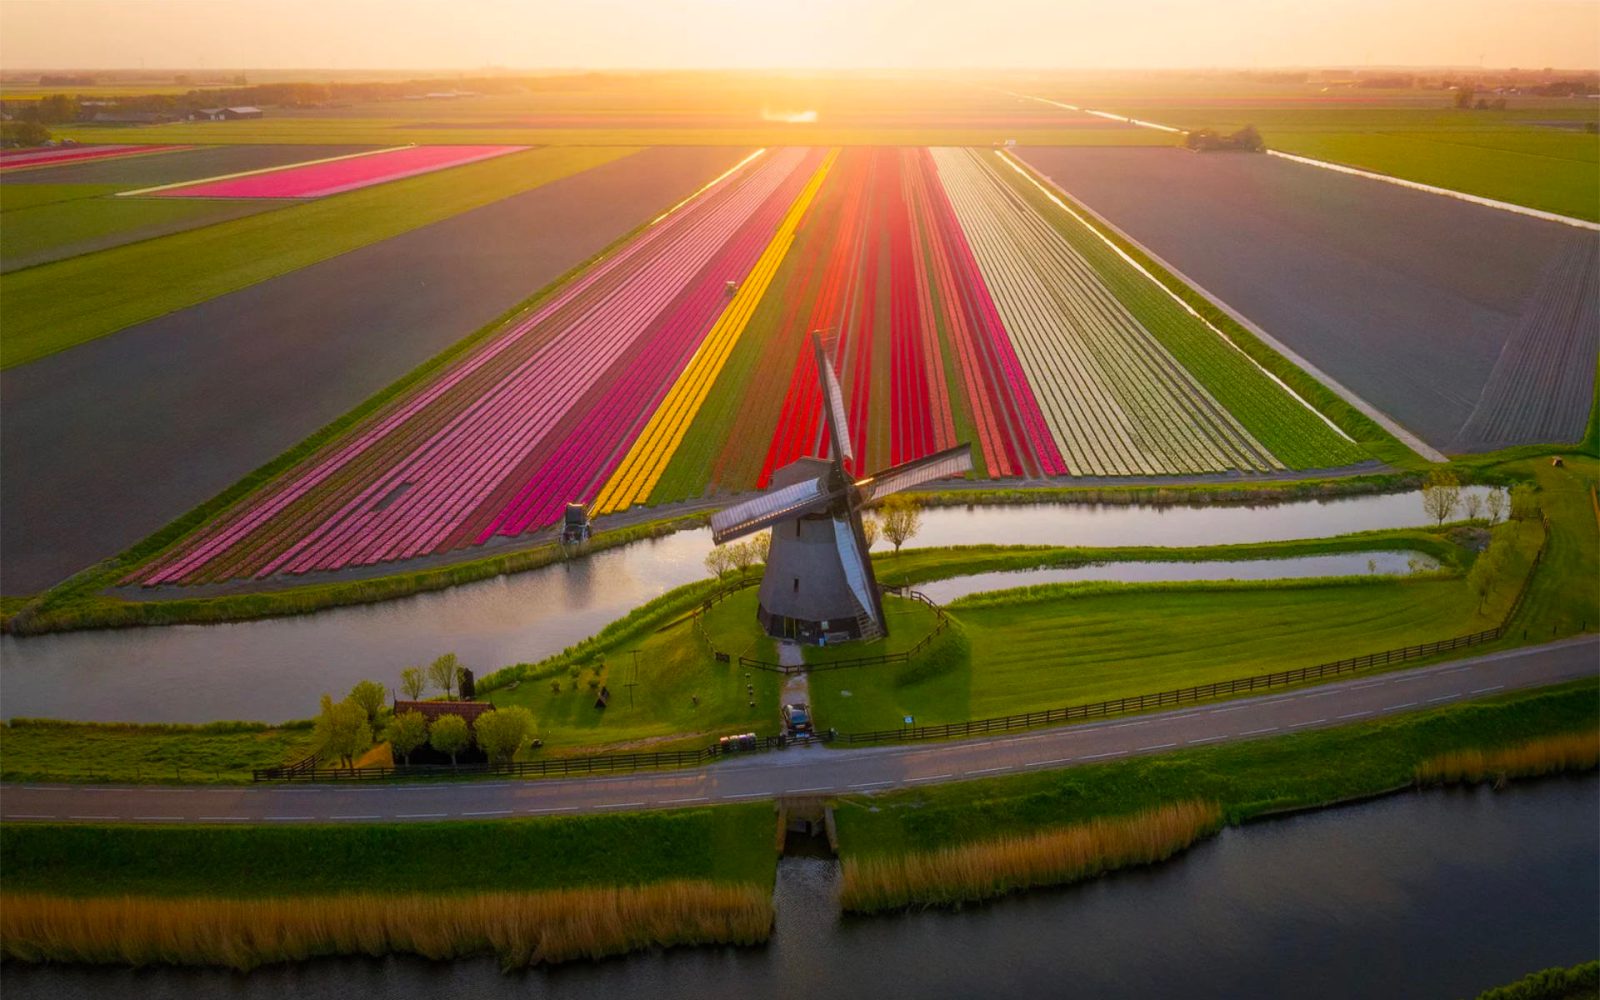 Tips for shooting amazing drone photos from Dutch photographer